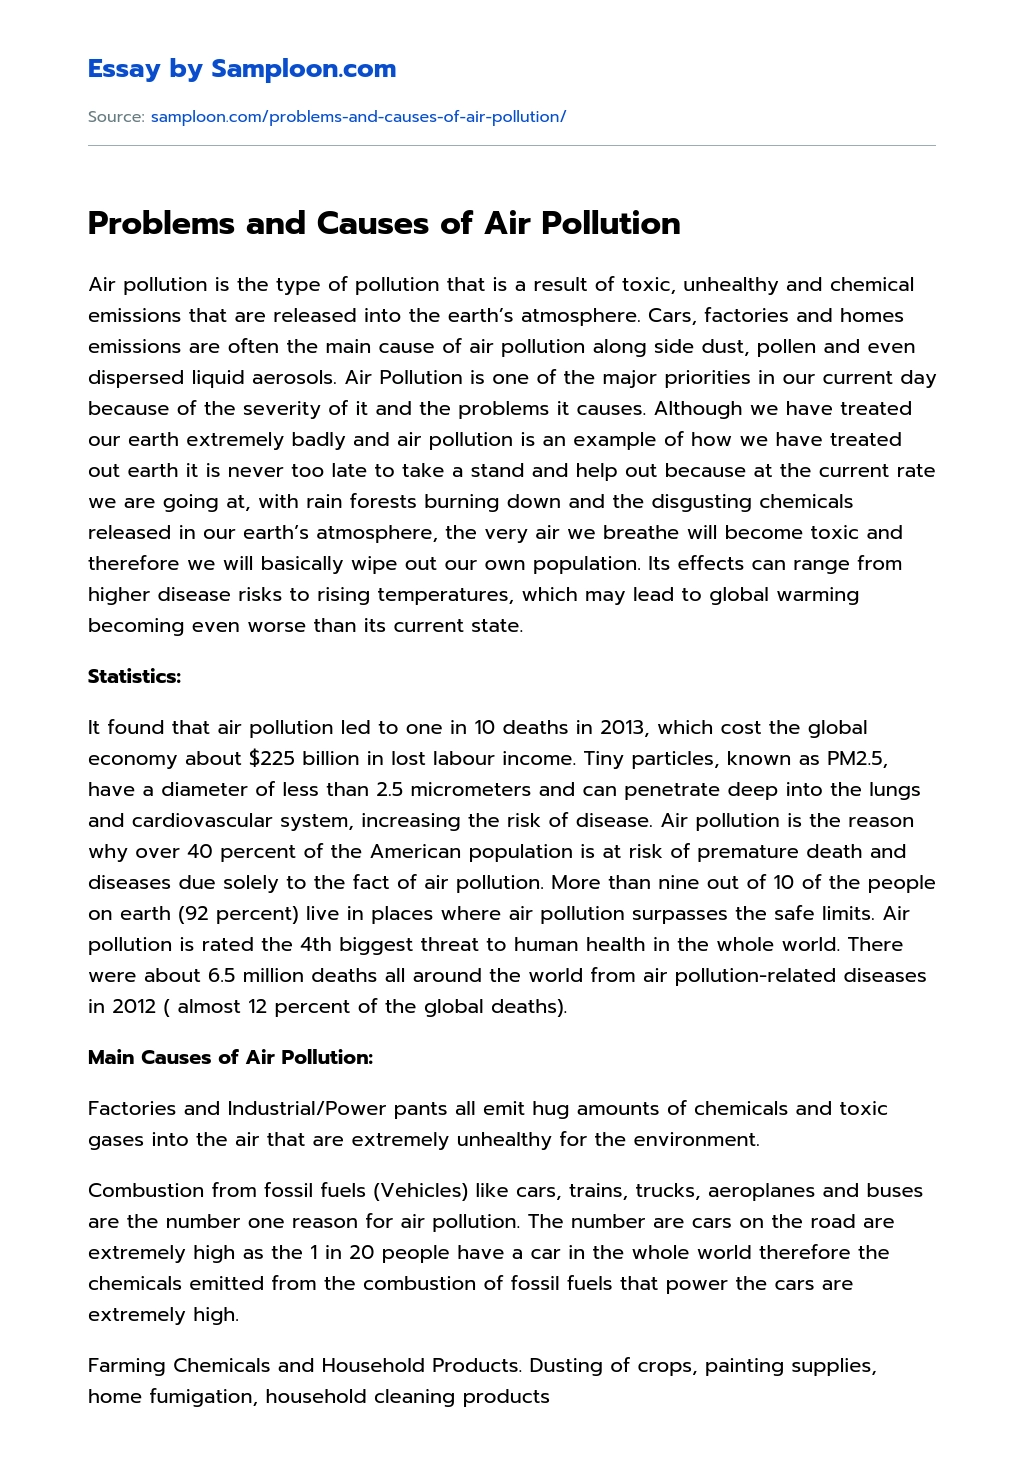 Problems and Causes of Air Pollution essay